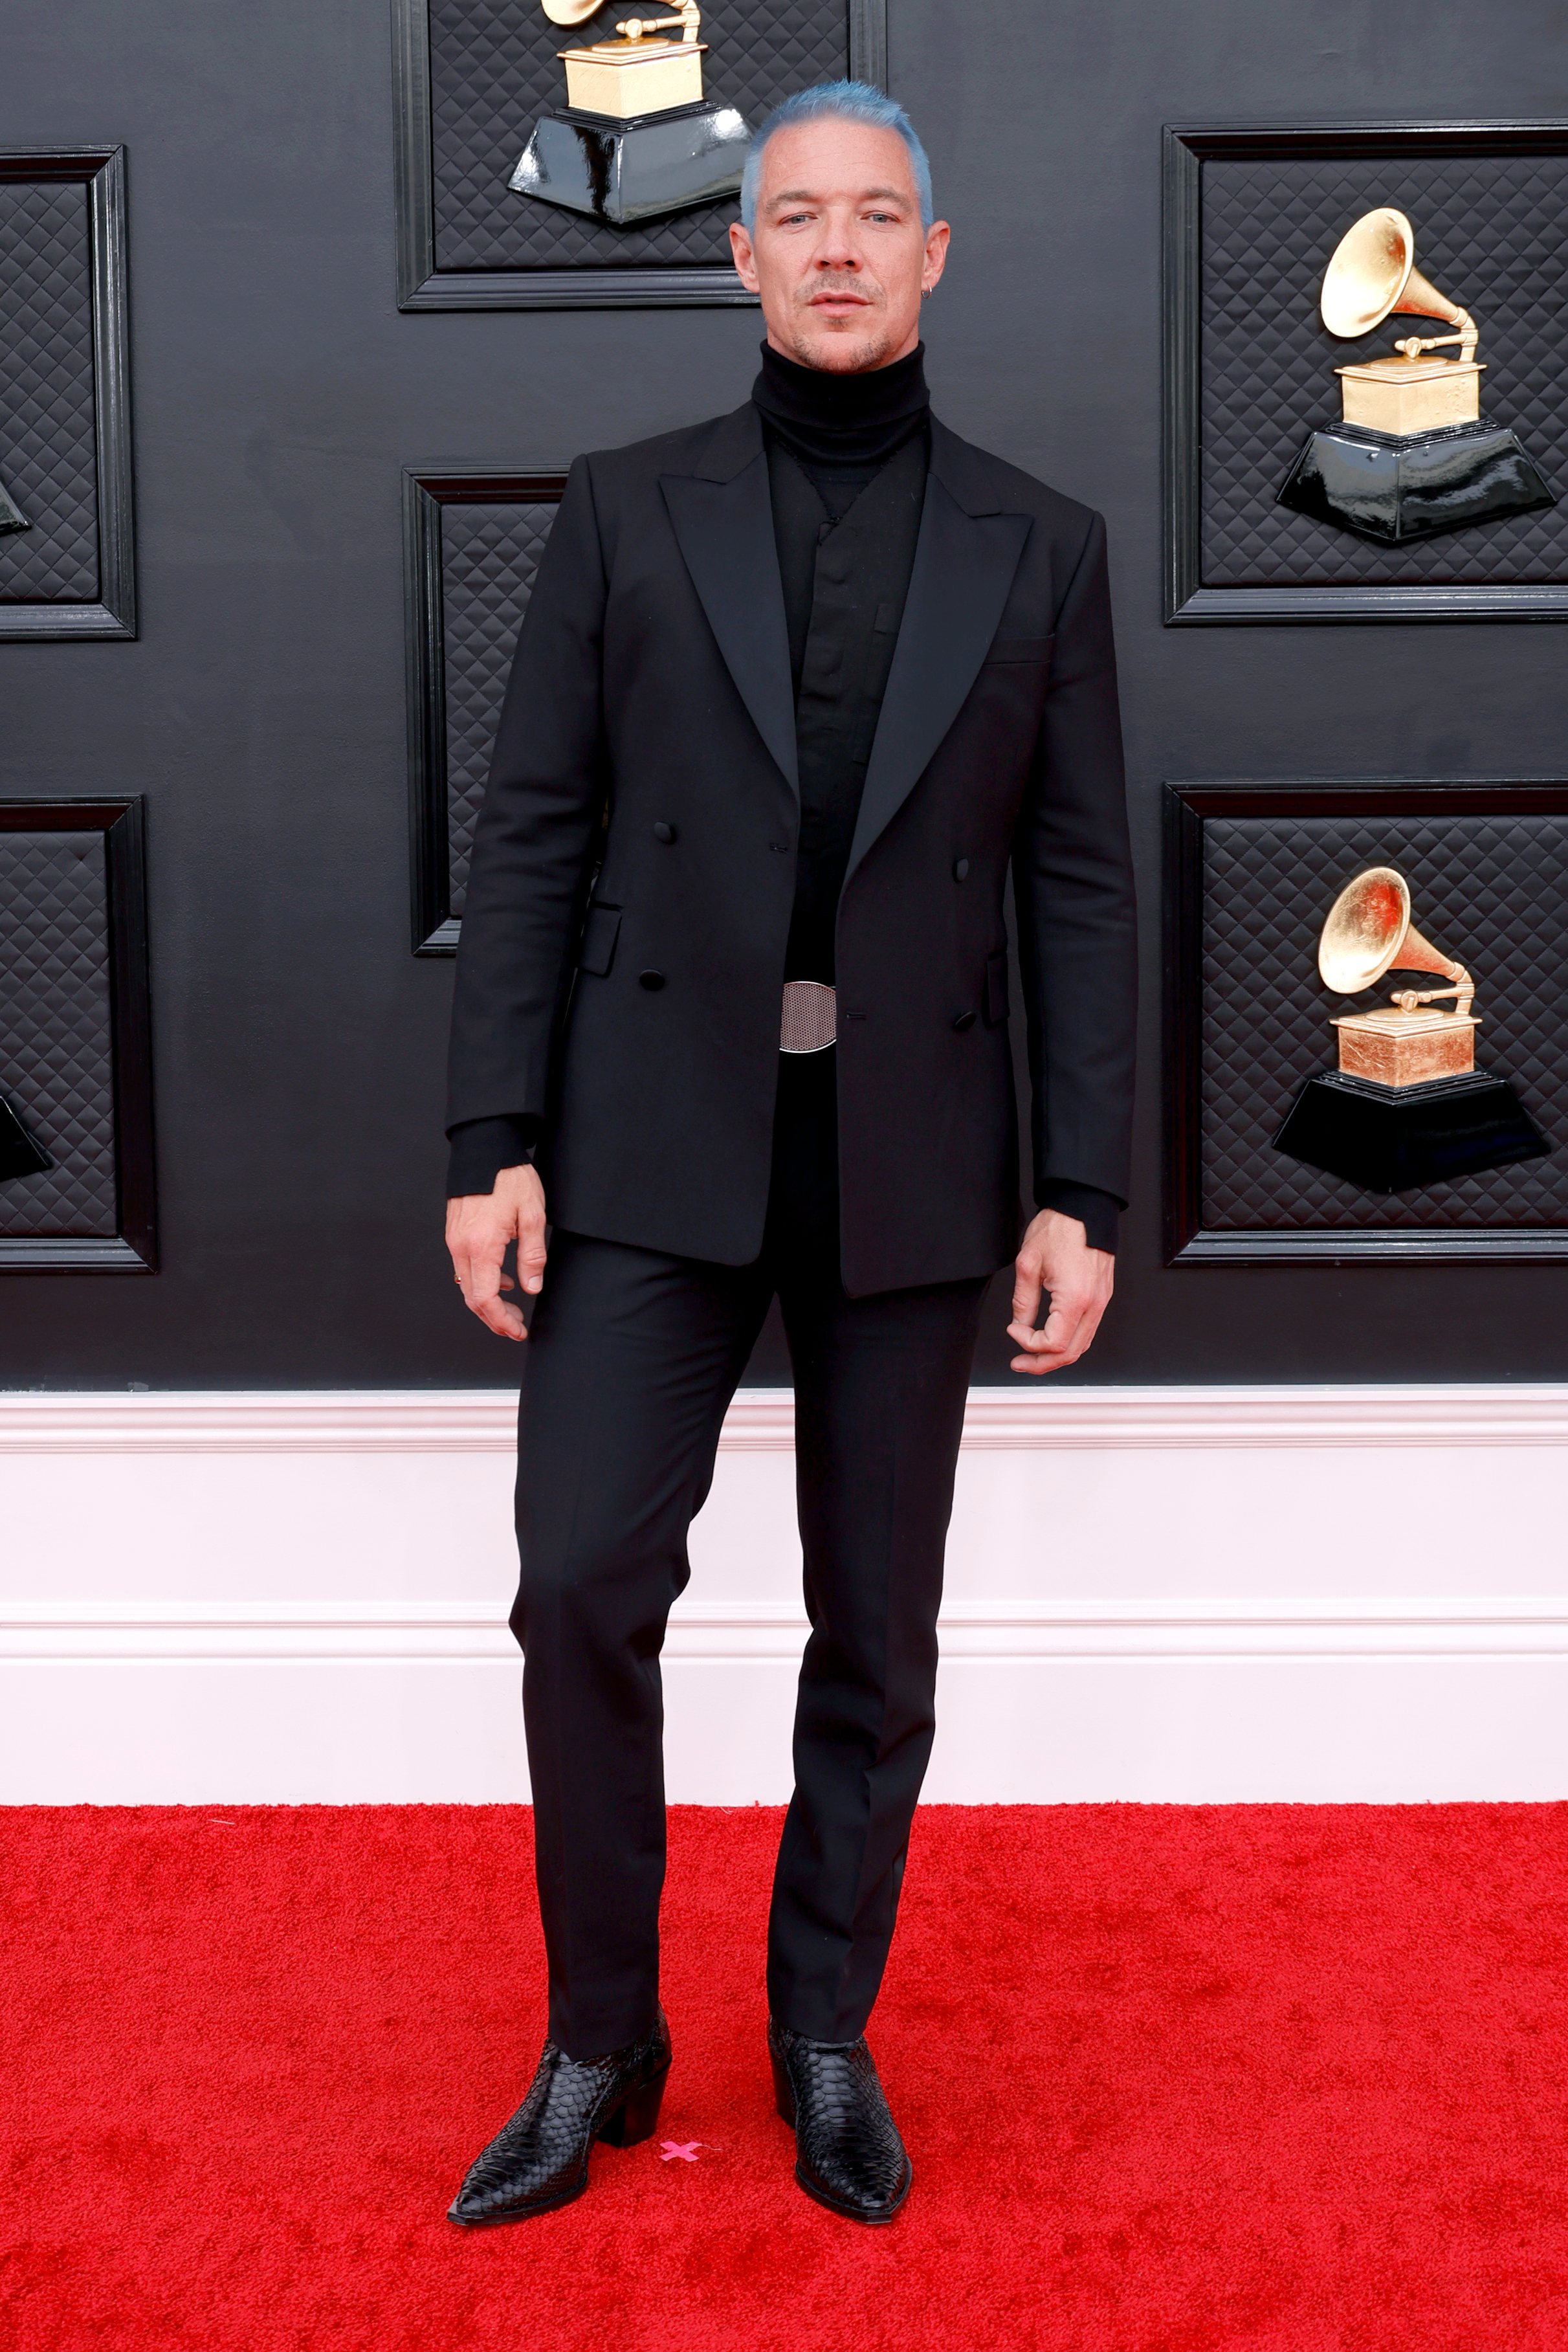 64th Annual GRAMMY Awards - Arrivals